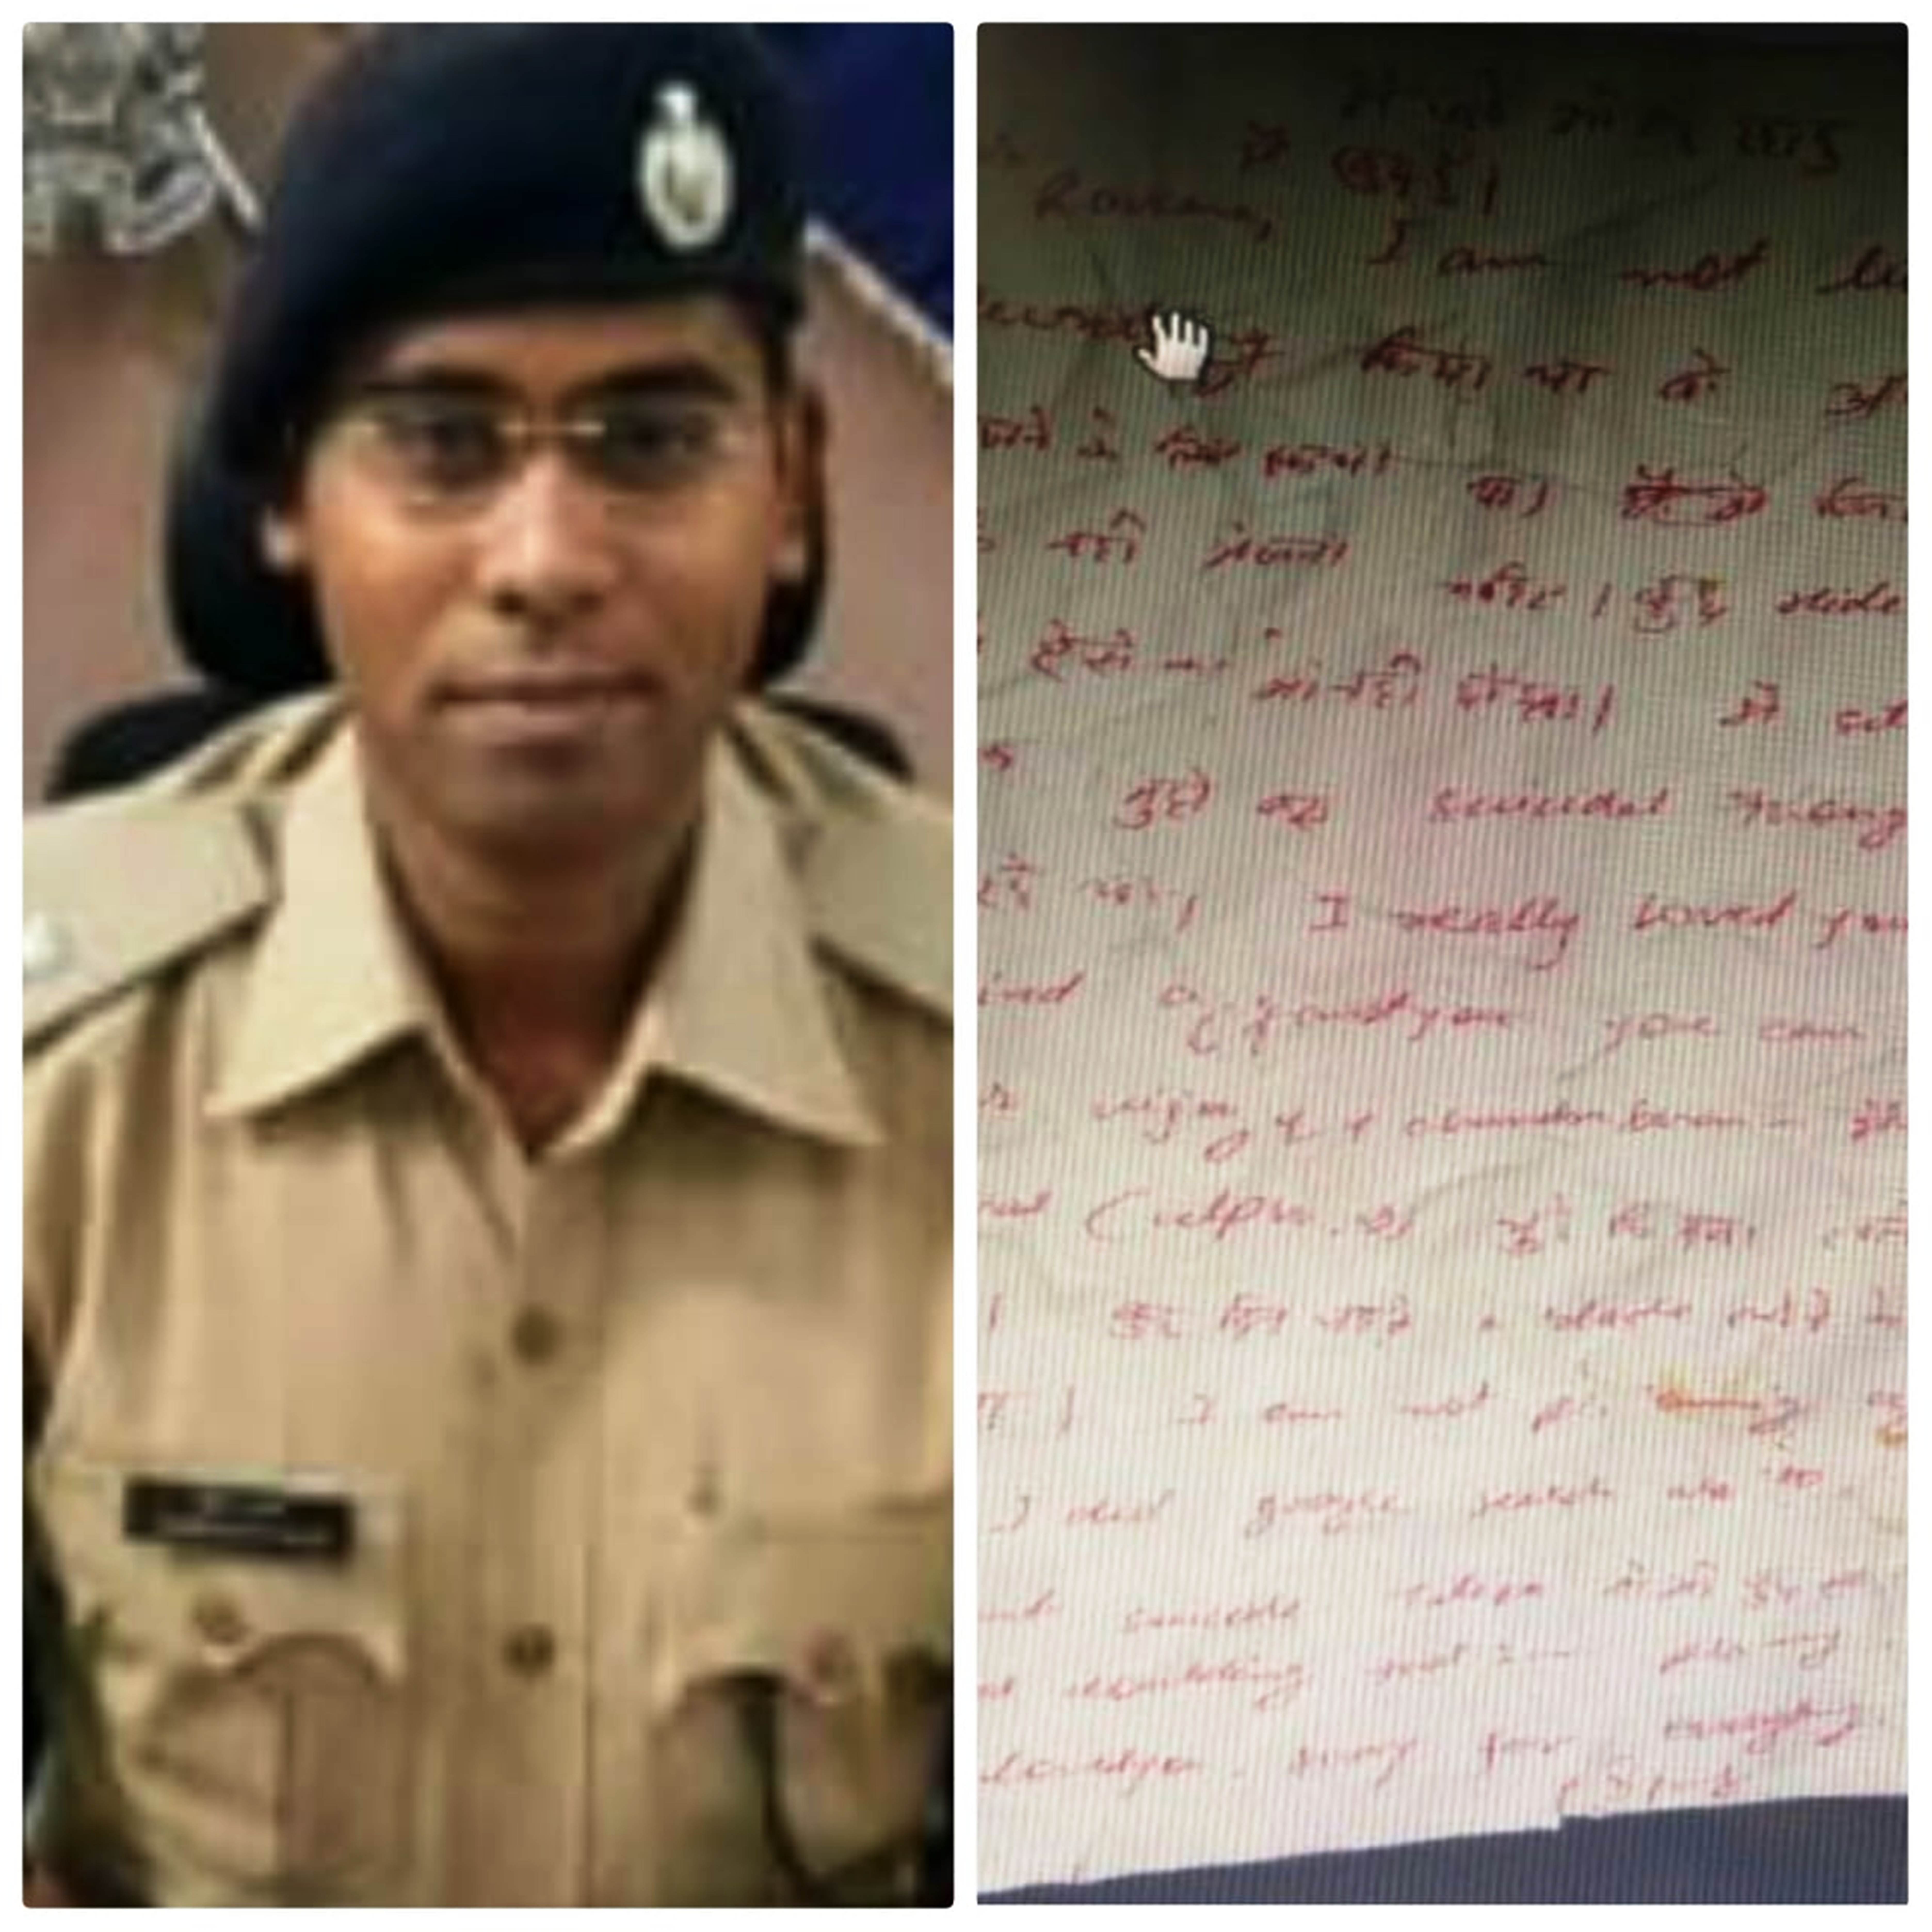 ips officer surendra das lost battle with life in kanpur